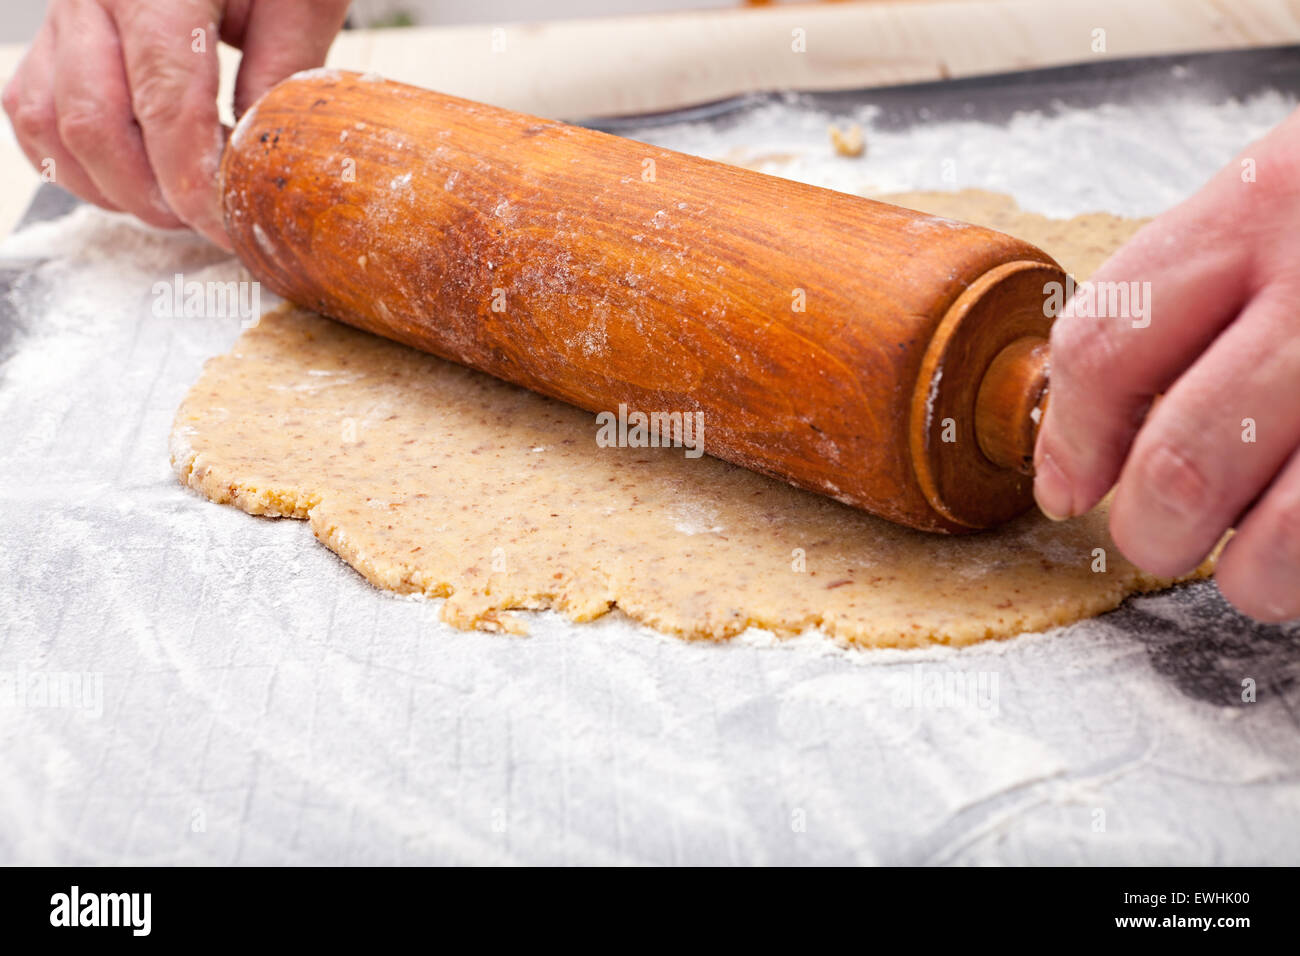 Roll out with wooden rolling pin the biscuit dough on the baking mat Stock Photo